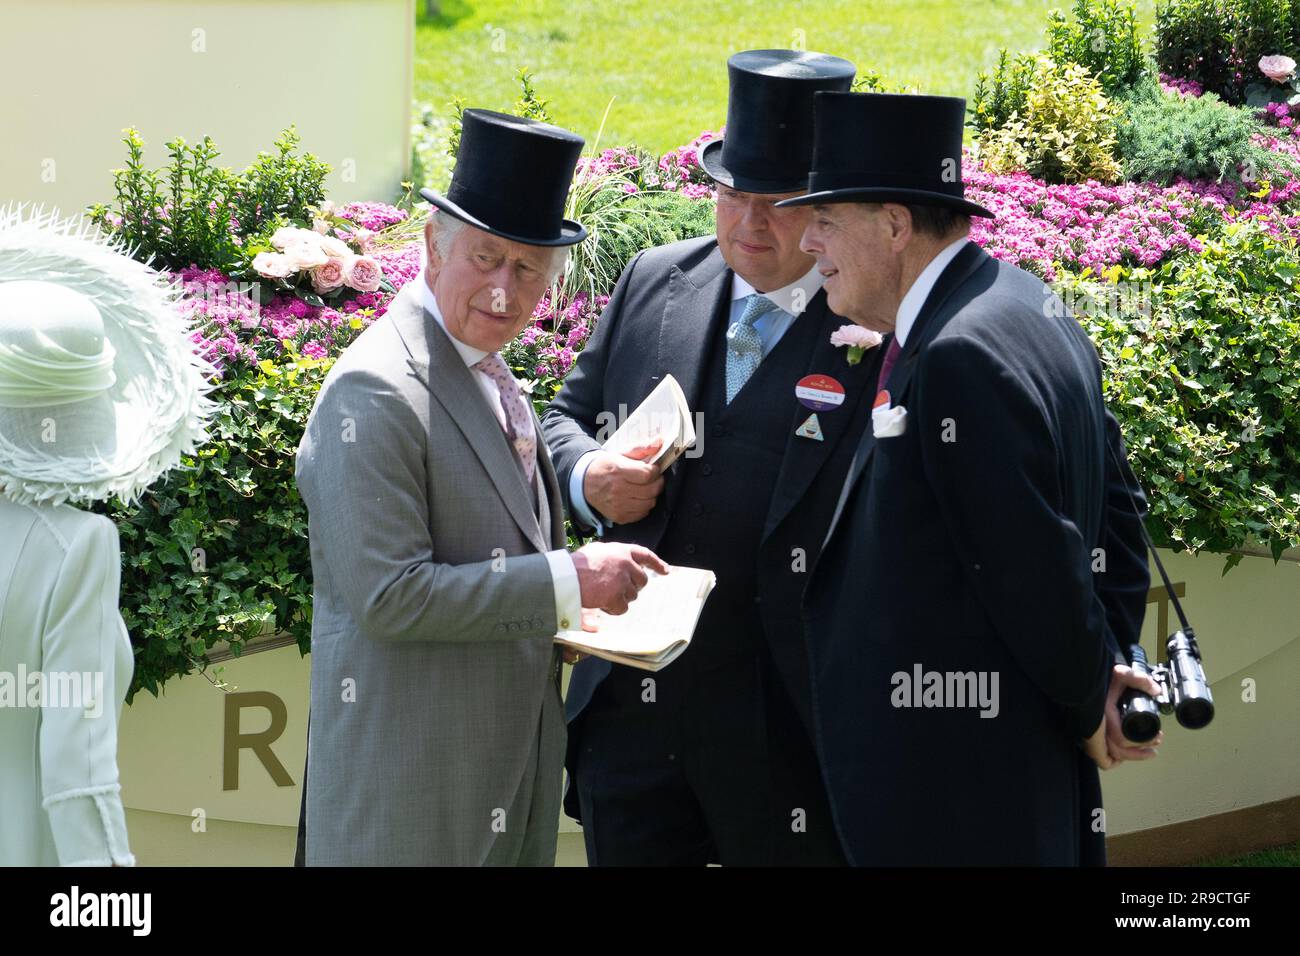 Ascot, Berkshire, UK. 22nd, June, 2023. King Charles III in the Parade Ring at Ascot Racecourse on Ladies Day chatting with Sir Francis Brooke His Majesty's Representative (M) and The Rt. Hon the Lord Soames of Fletching (R). Credit: Maureen McLean/Alamy Stock Photo